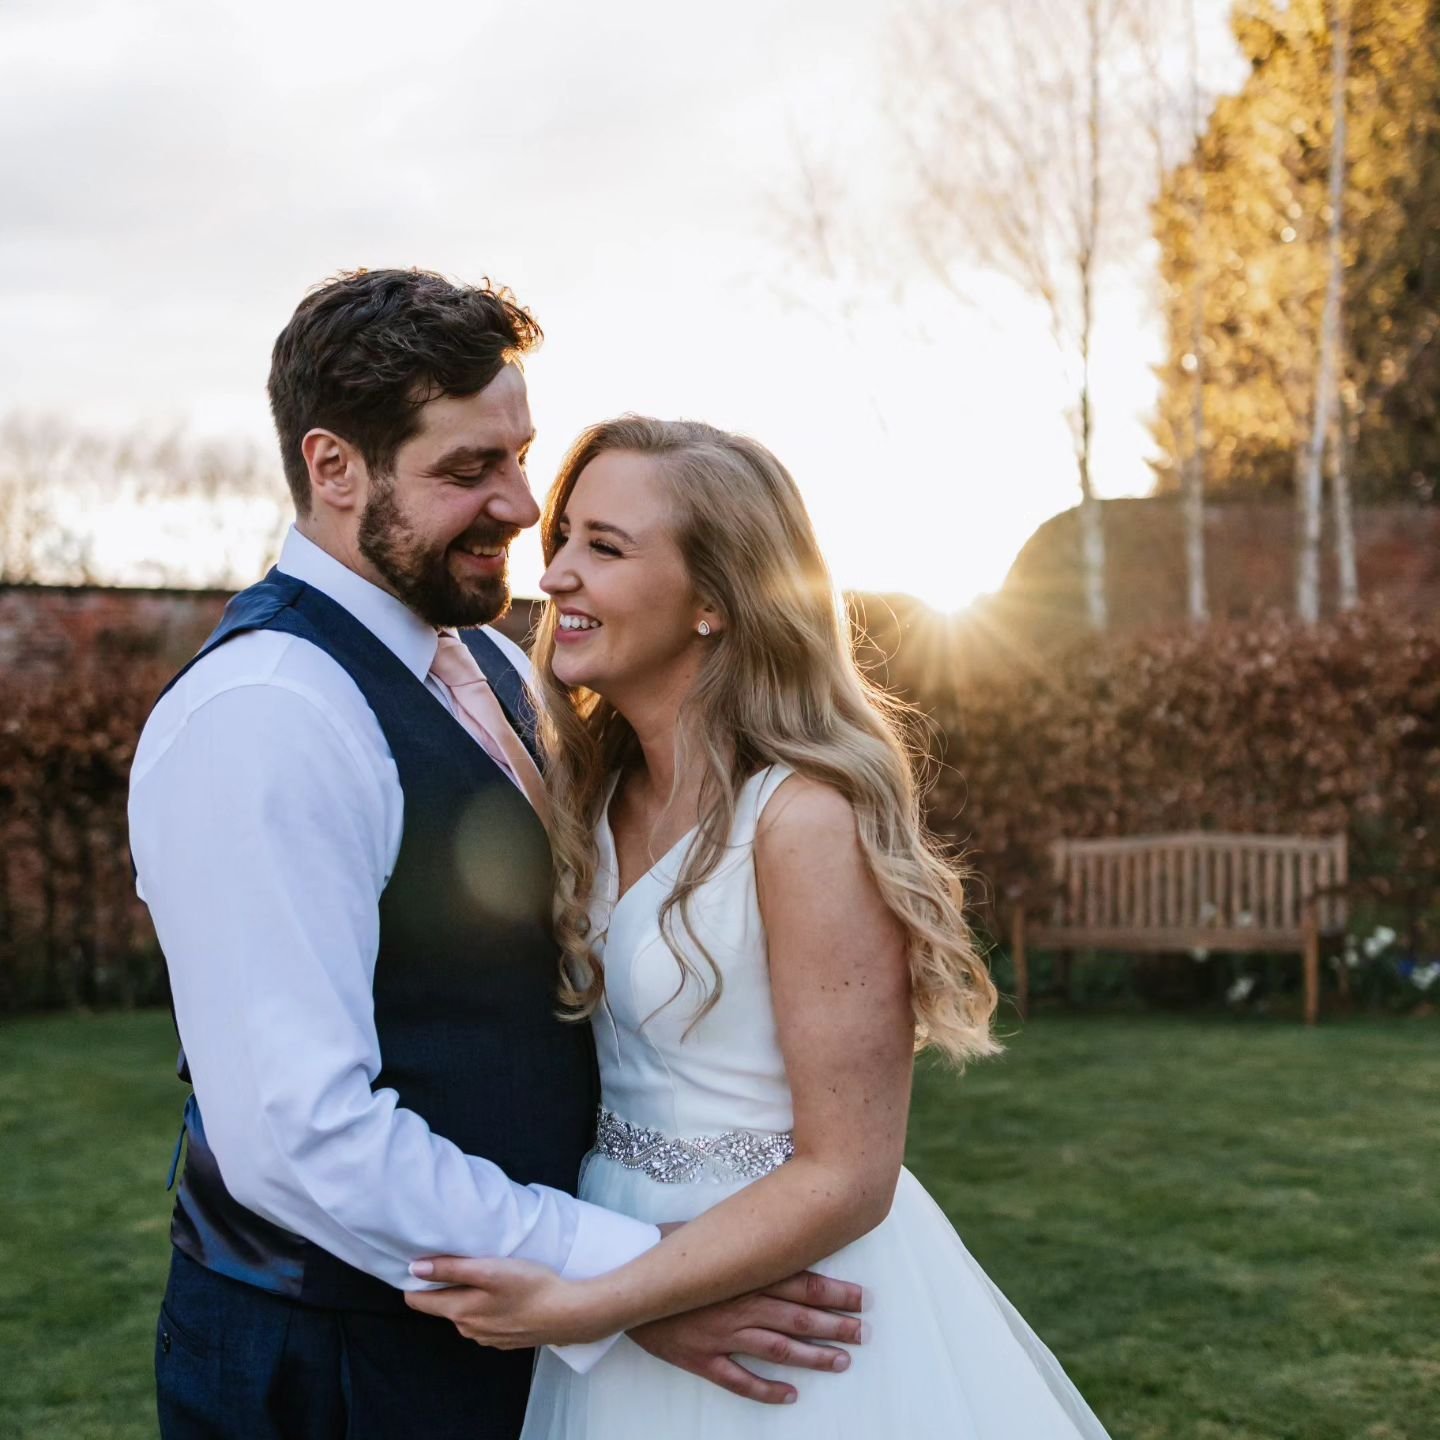 April wedding spotlight 💍

Step into Laura and Miles' celebration in our walled garden, giving you a taste of what our April weddings look like. The garden is filled with blooming tulips, tiarella, and blossom. The pastel orange and dusky pink tones